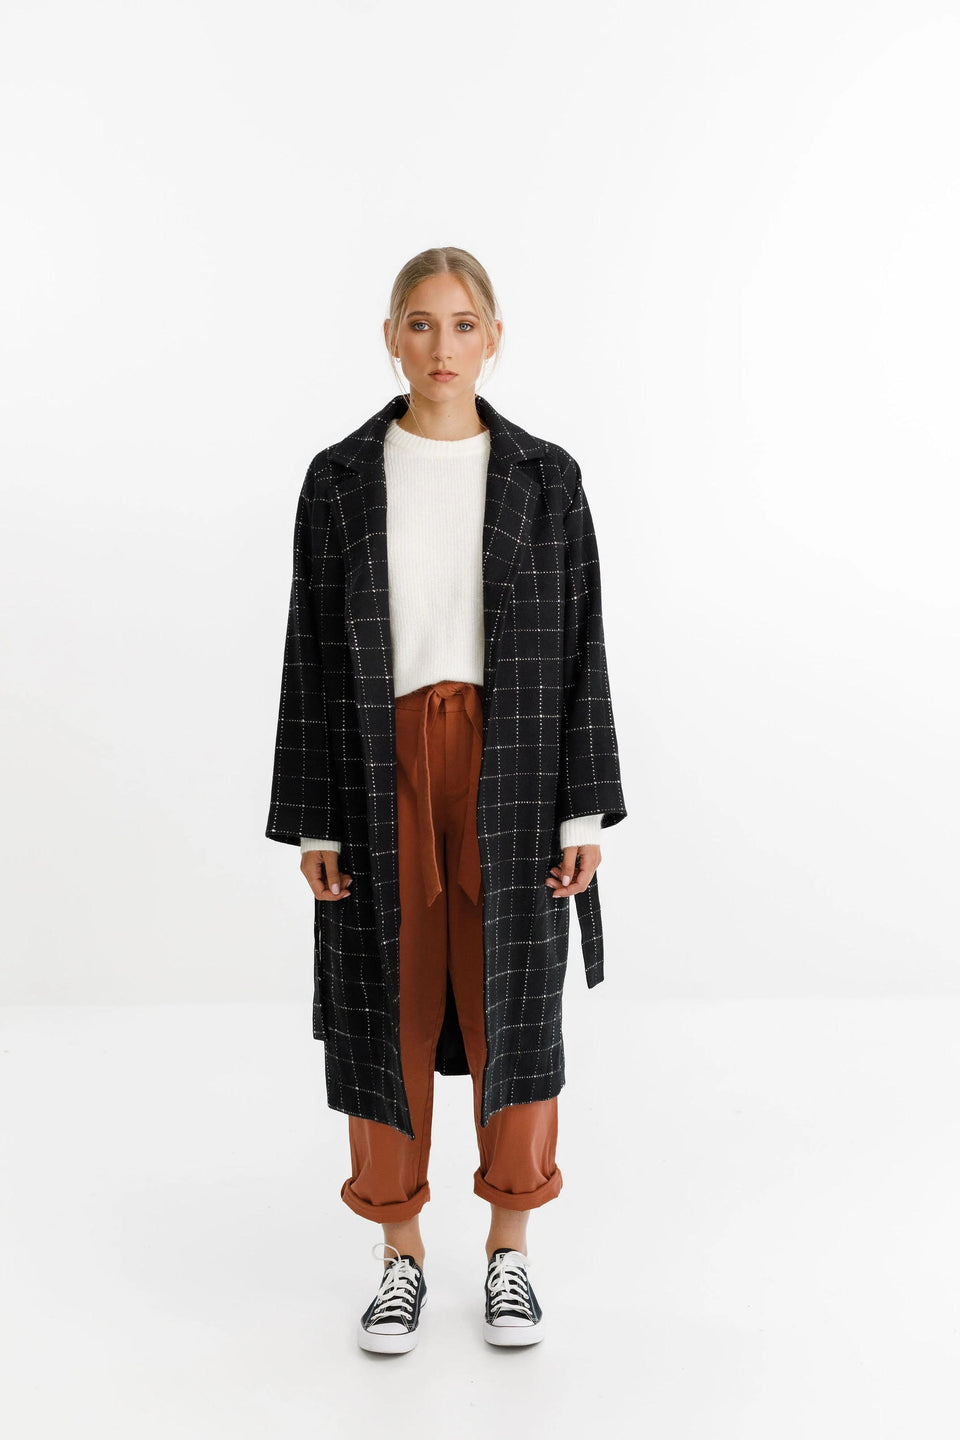 Thing Thing Clement Coat Black White Grid